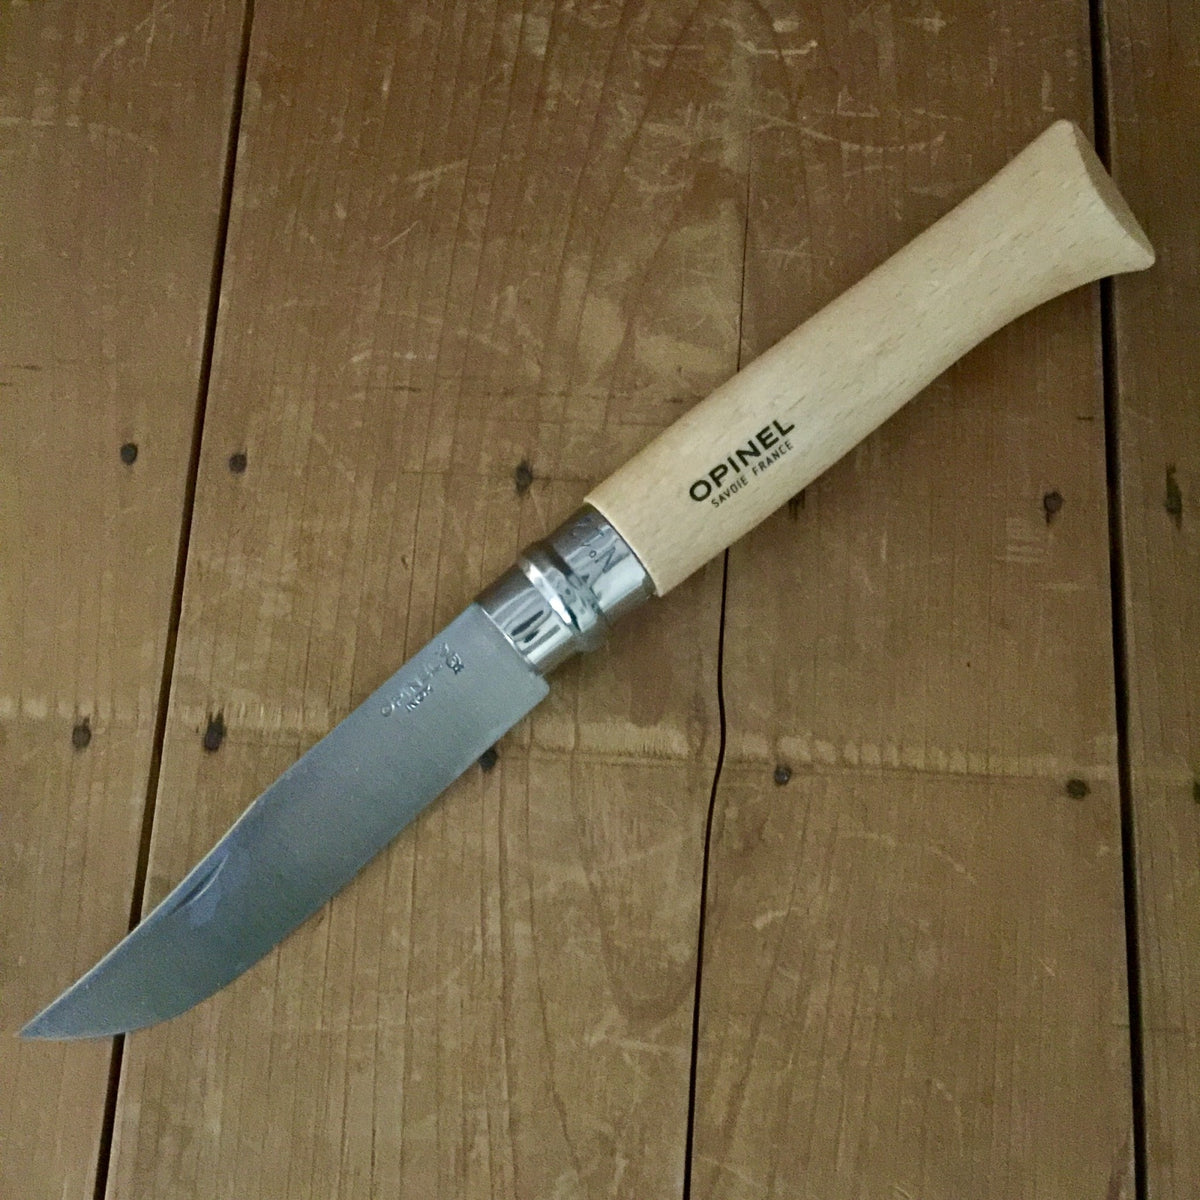 OPINEL NO. 10 KNIFE - STAINLESS STEEL - PURCHASE OF